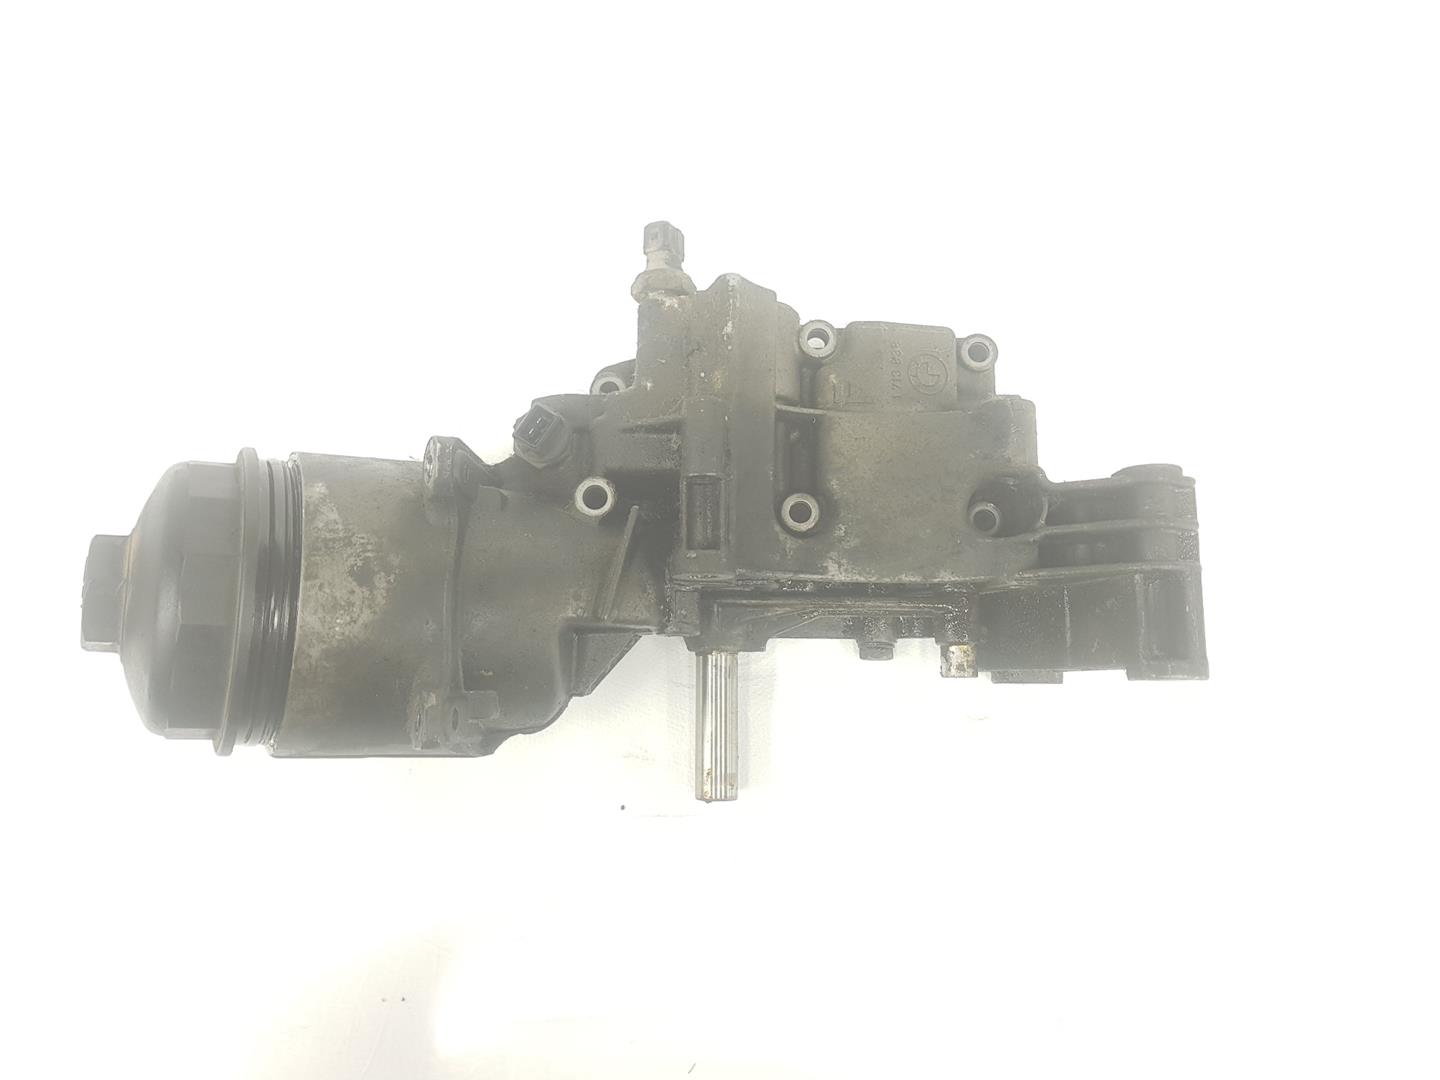 BMW 3 Series E46 (1997-2006) Other Engine Compartment Parts 11001714564, 1714564 24193794